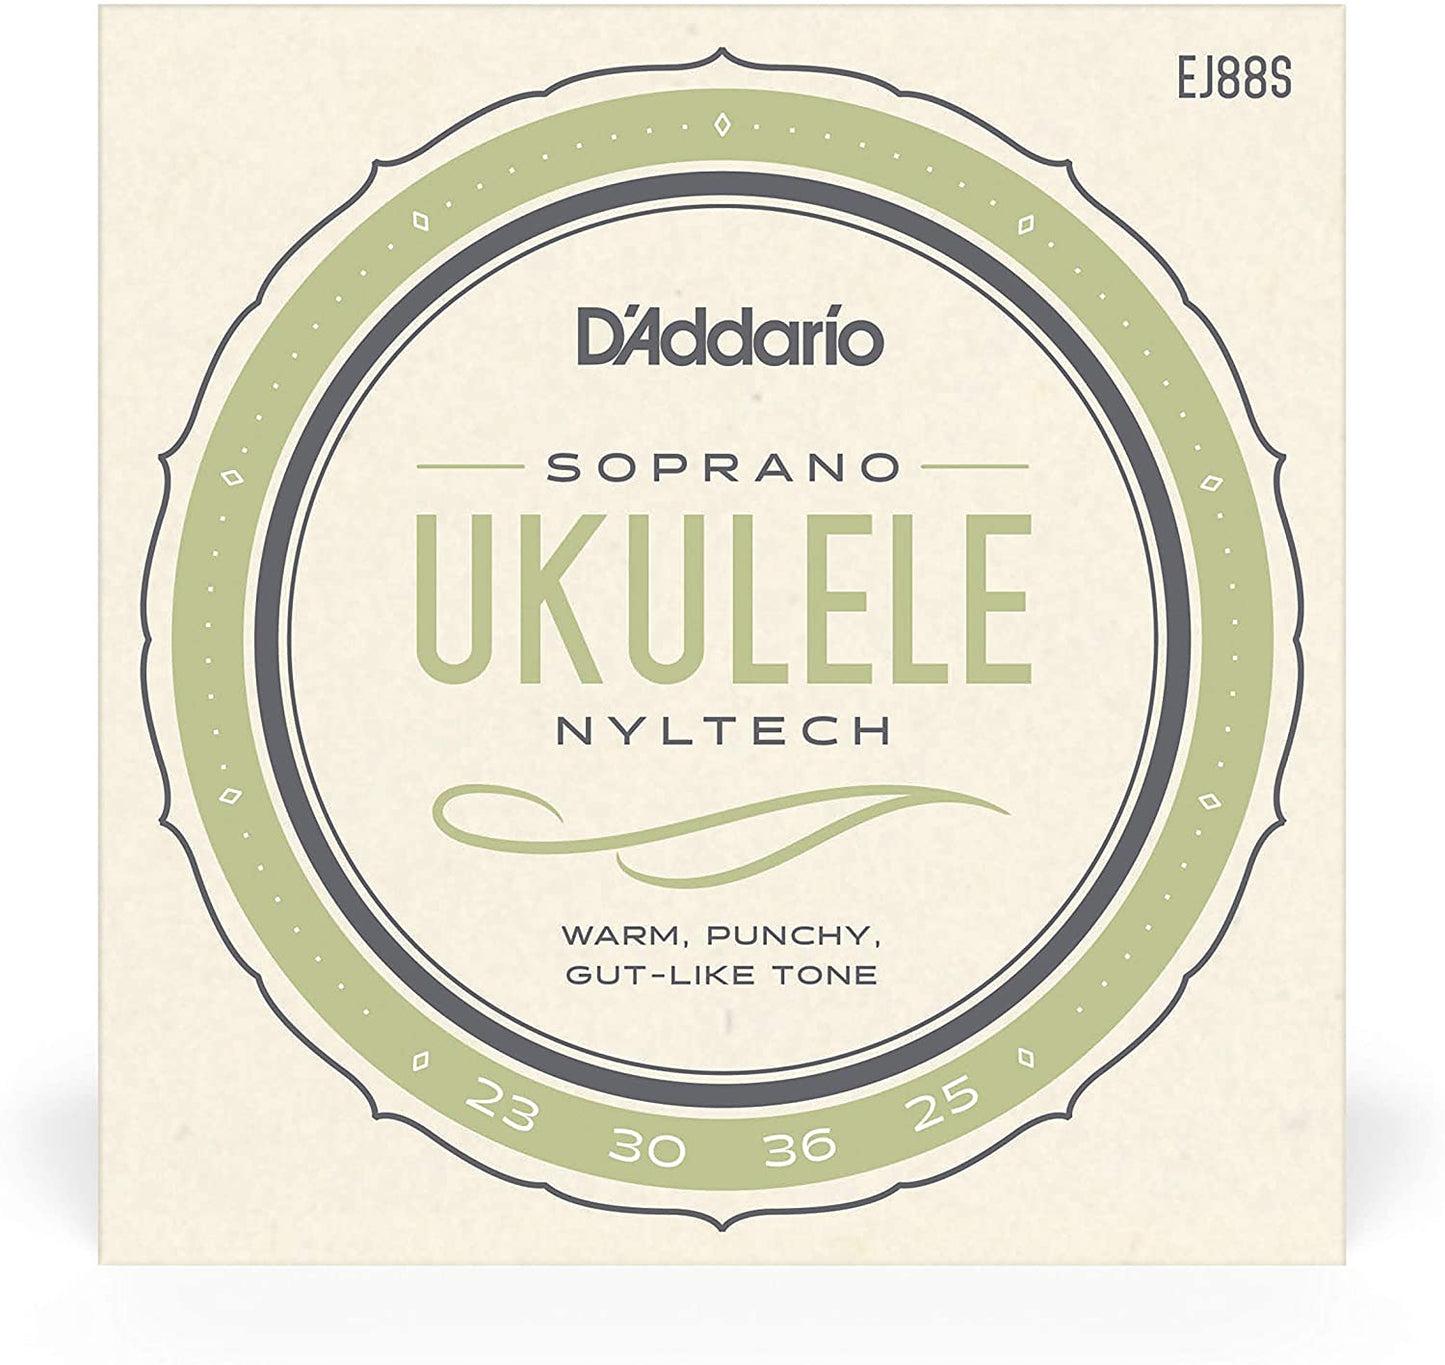 D'Addario Pro Arte Nyltech Ukulele Strings with Warm, Punchy Tones (Soprano, Concert) (EJ88C, EJ88S) for Musicians and Singers